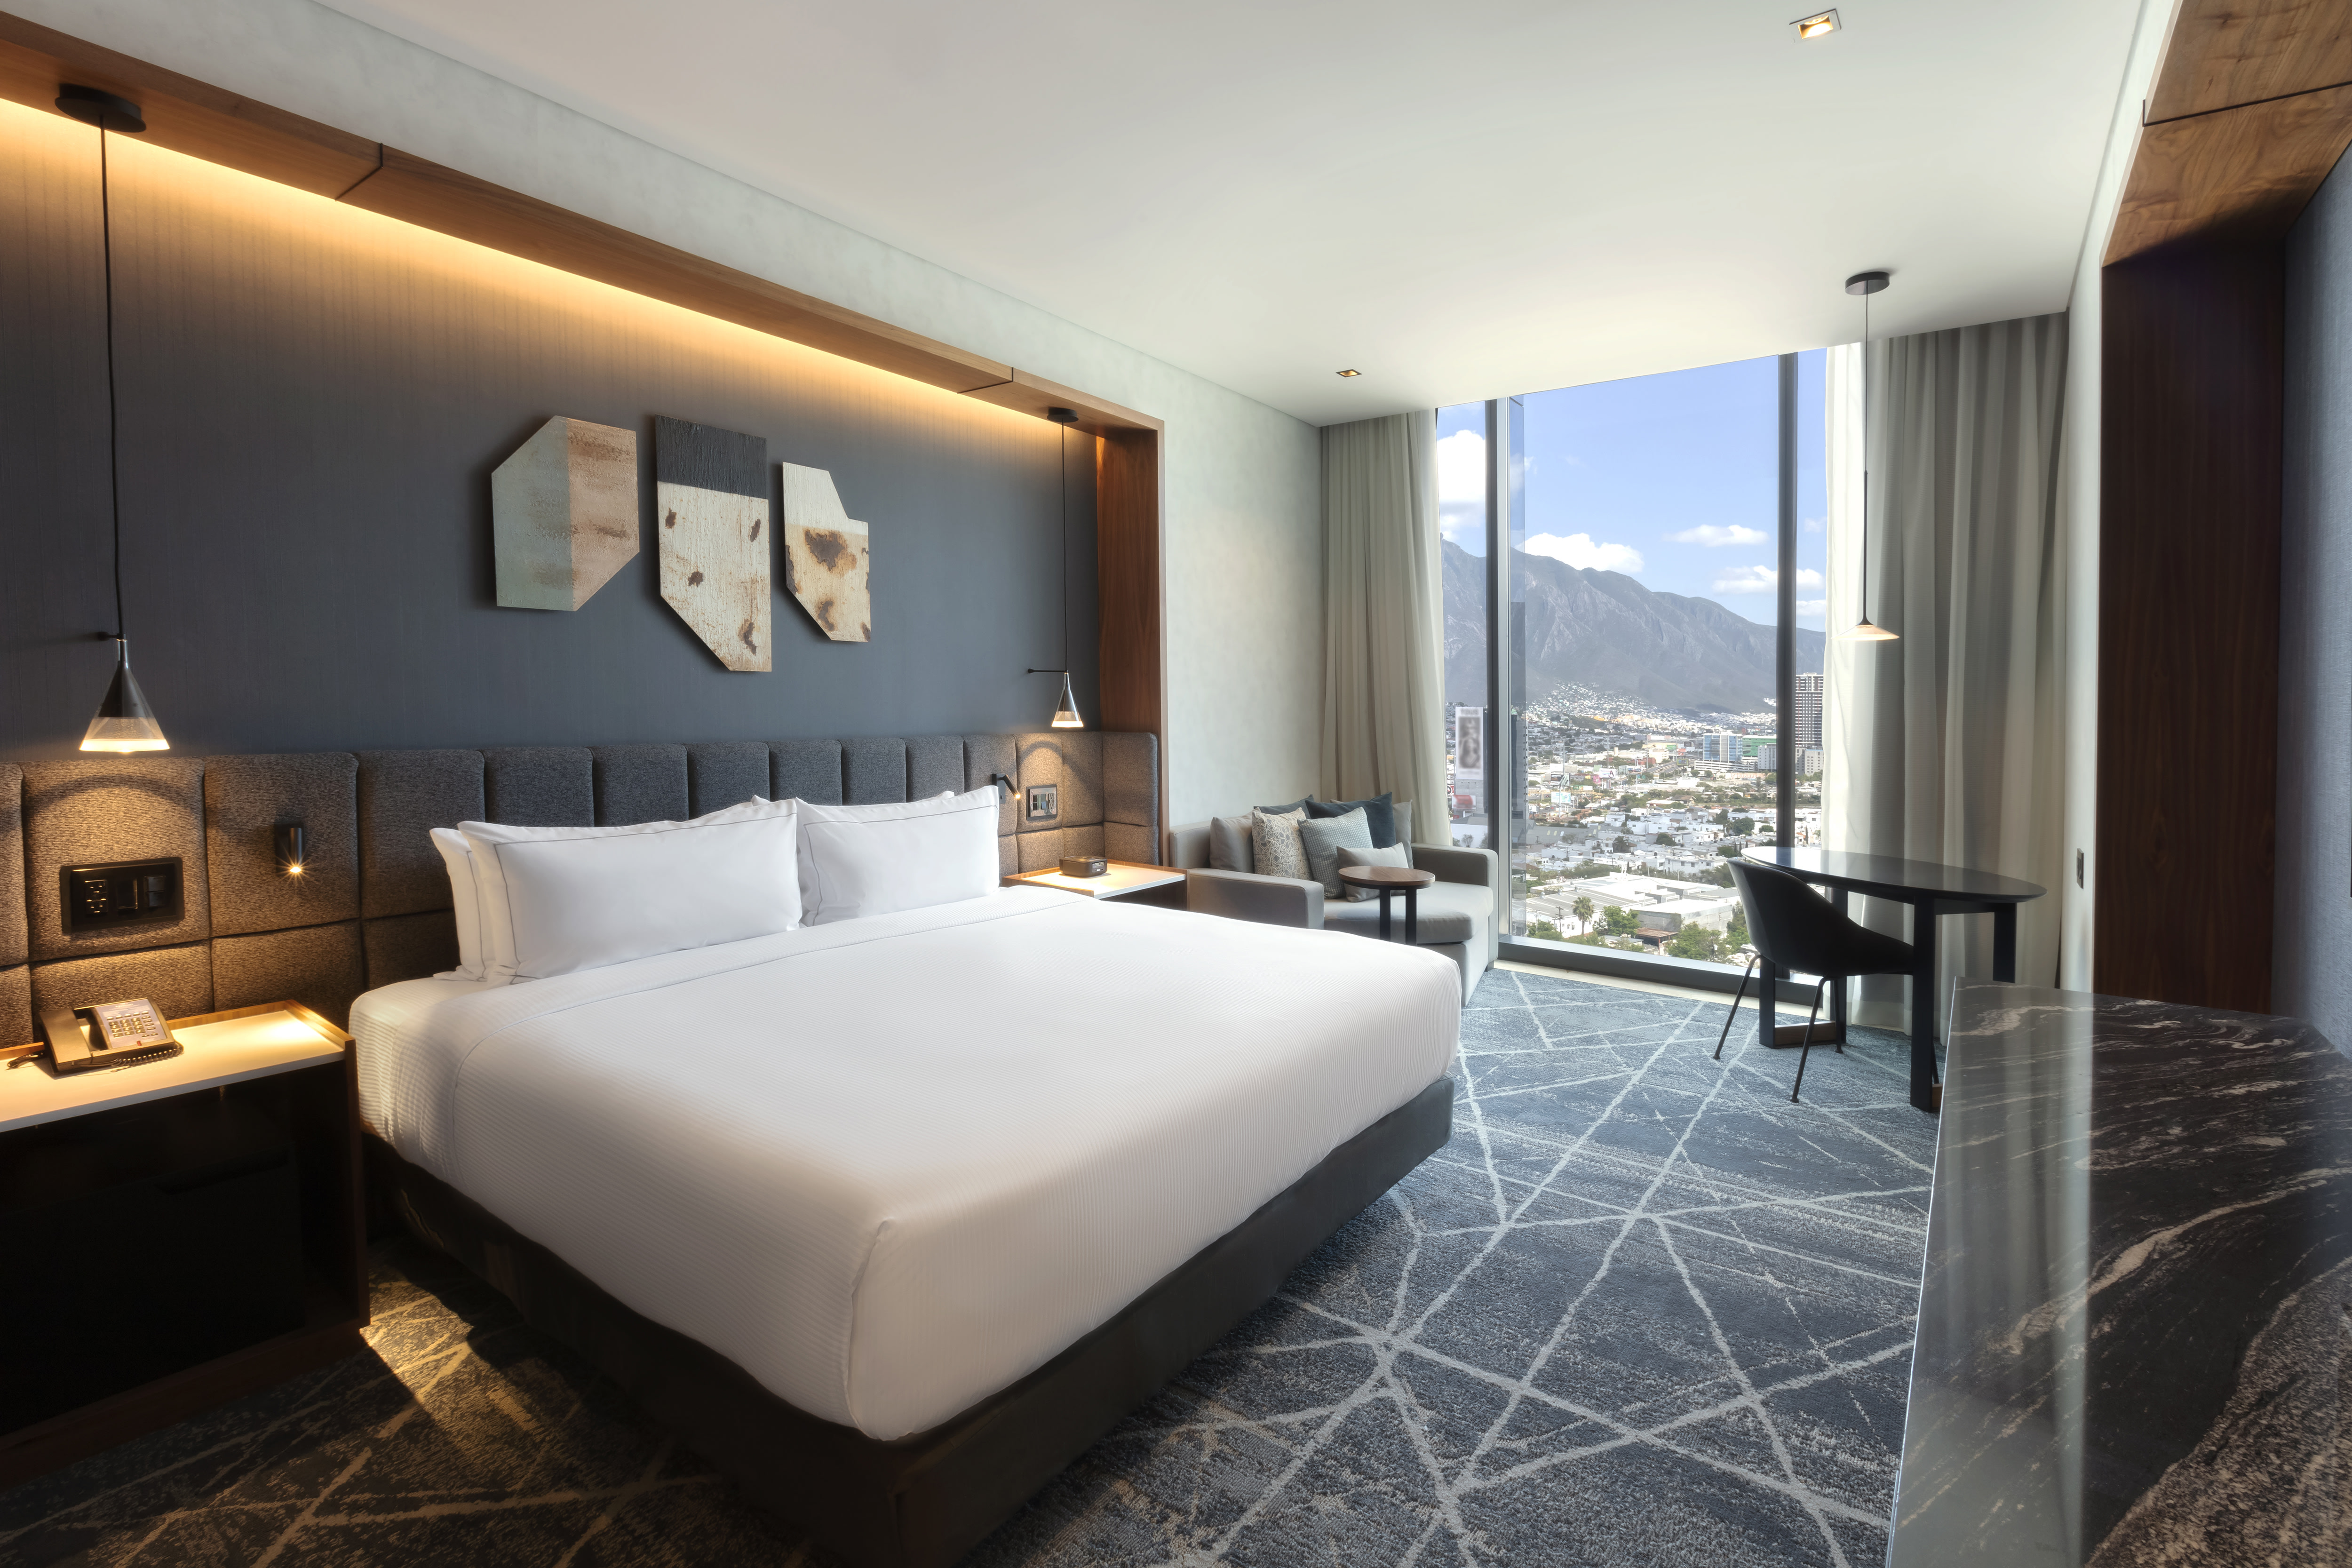 Guest room with king-sized bed and floor-to-ceiling windows with mountain and city views